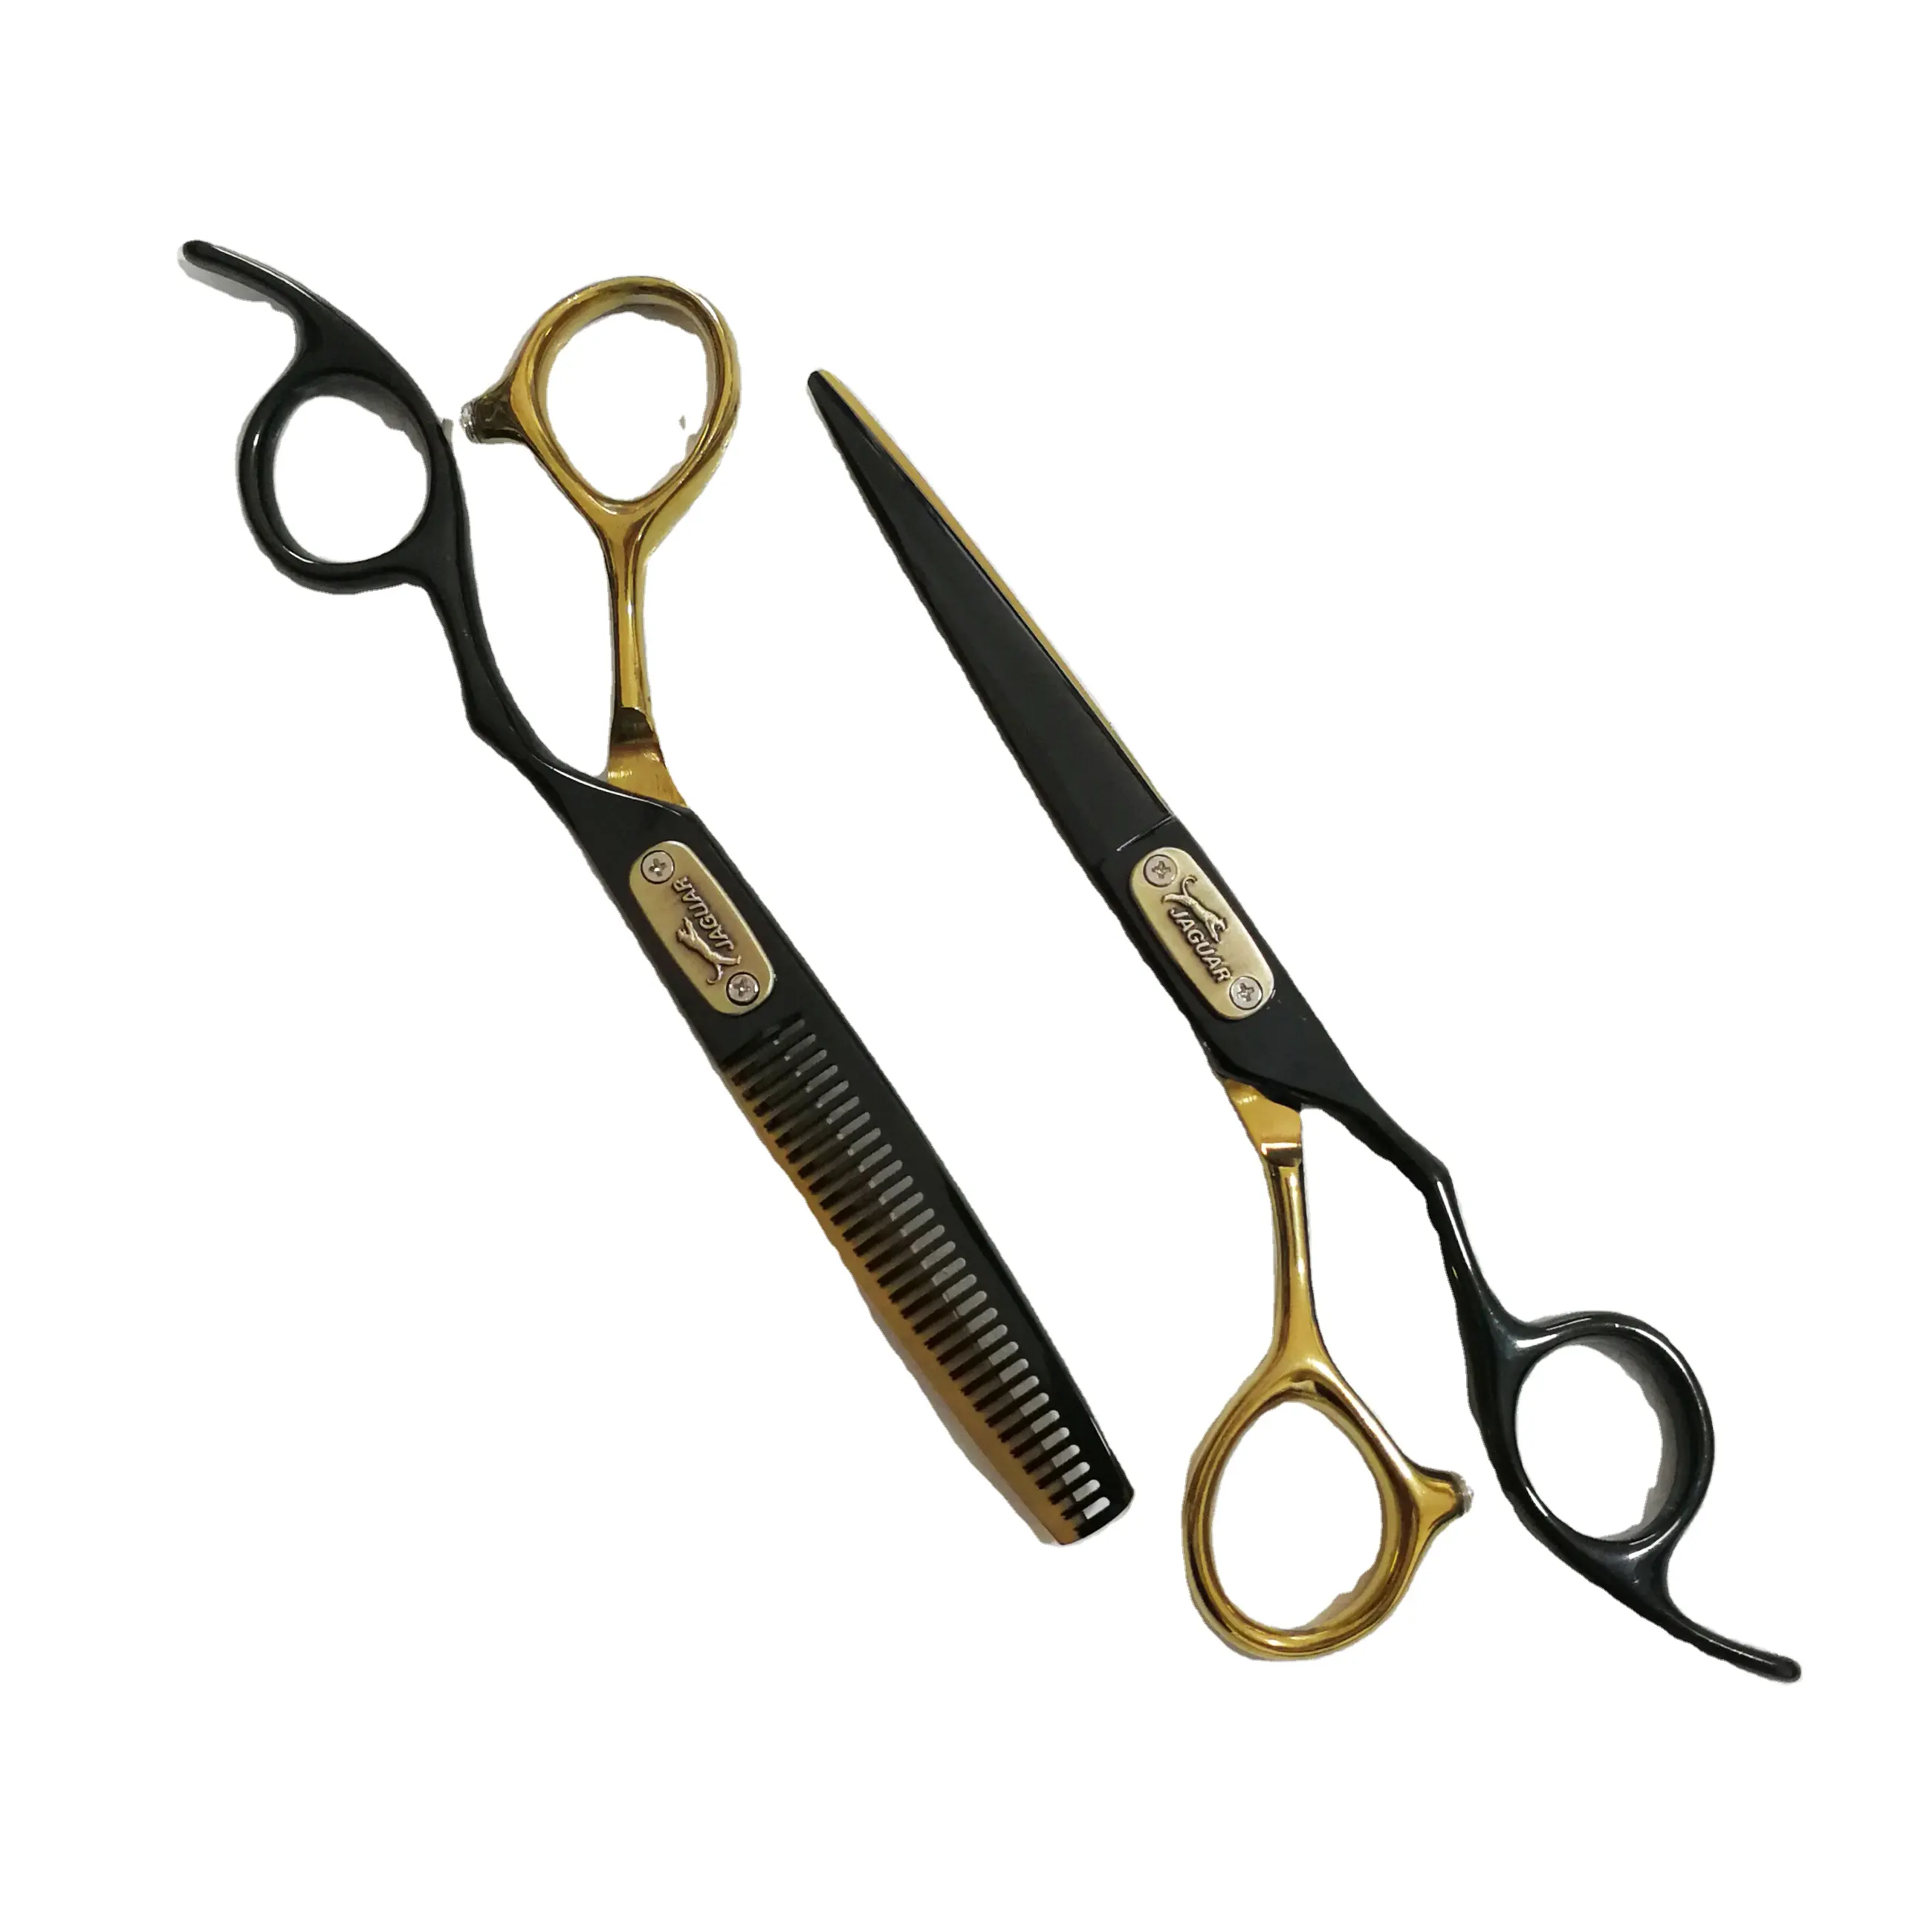 High Quality Hairdressing 440C Stainless Steel Professional Salon Barbers Cutting Scissor Hair Scissors Set